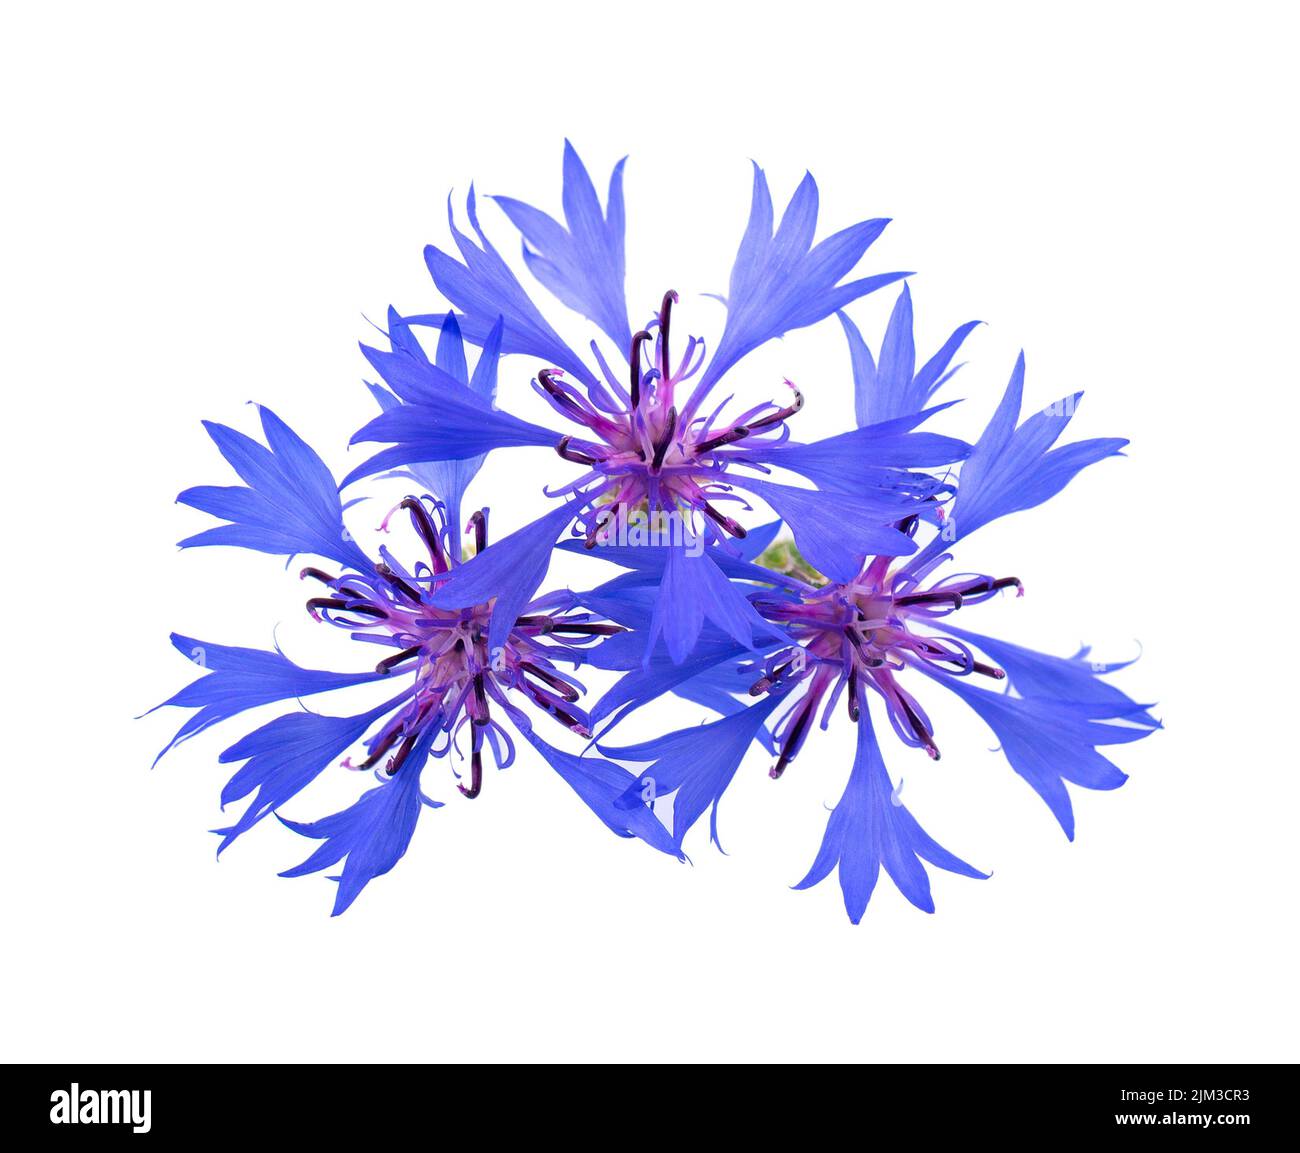 Purple knapweed flowers isolated on white background. Blue wild cornflower herb or bachelor button flower Stock Photo